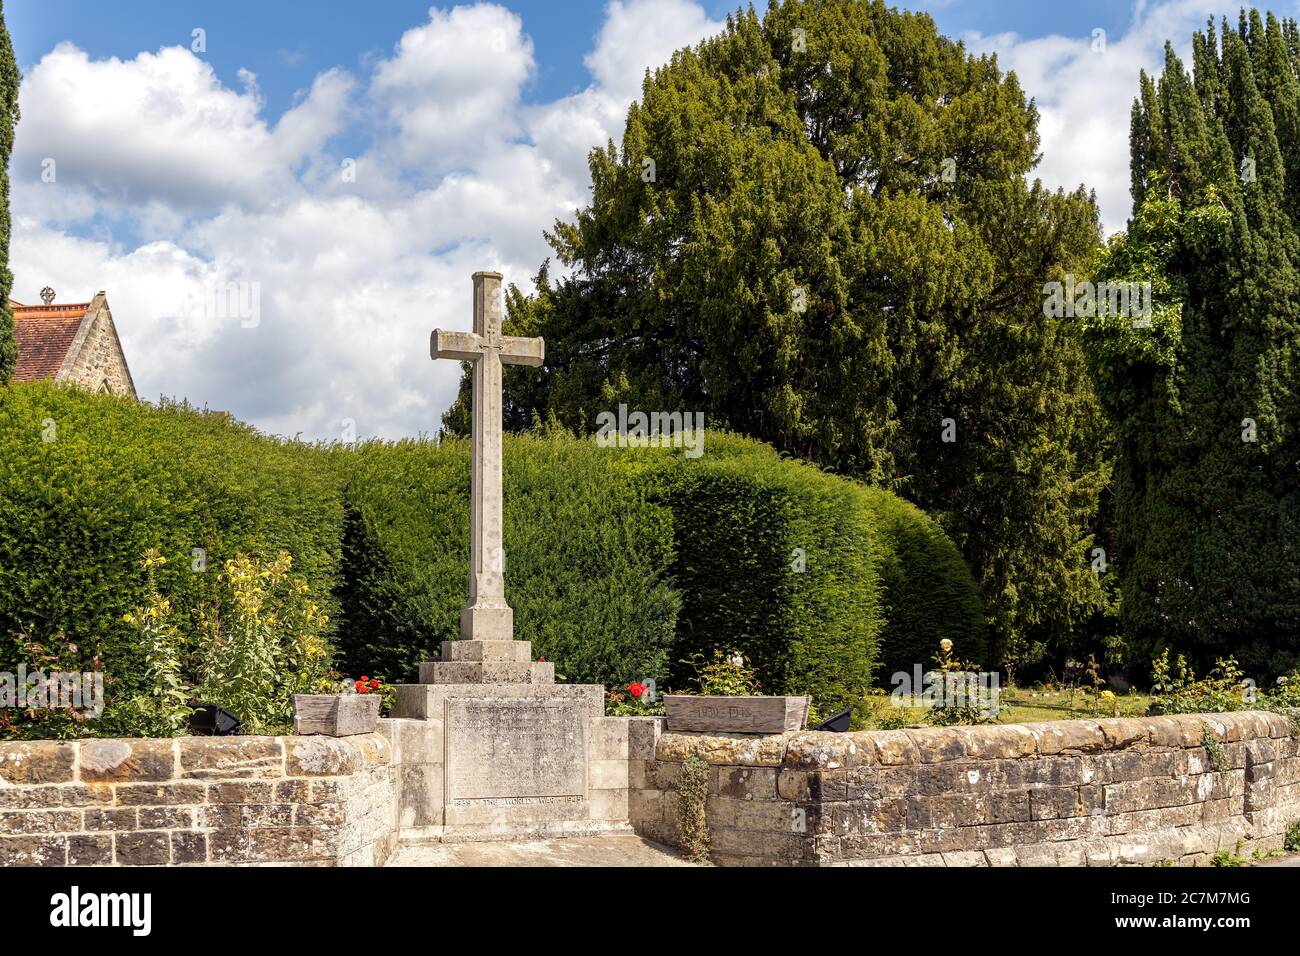 FLETCHING, EAST SUSSEX/UK - JULY 17 : View of the War Memorial in Fletching East Sussex on July 17, 2020 Stock Photo